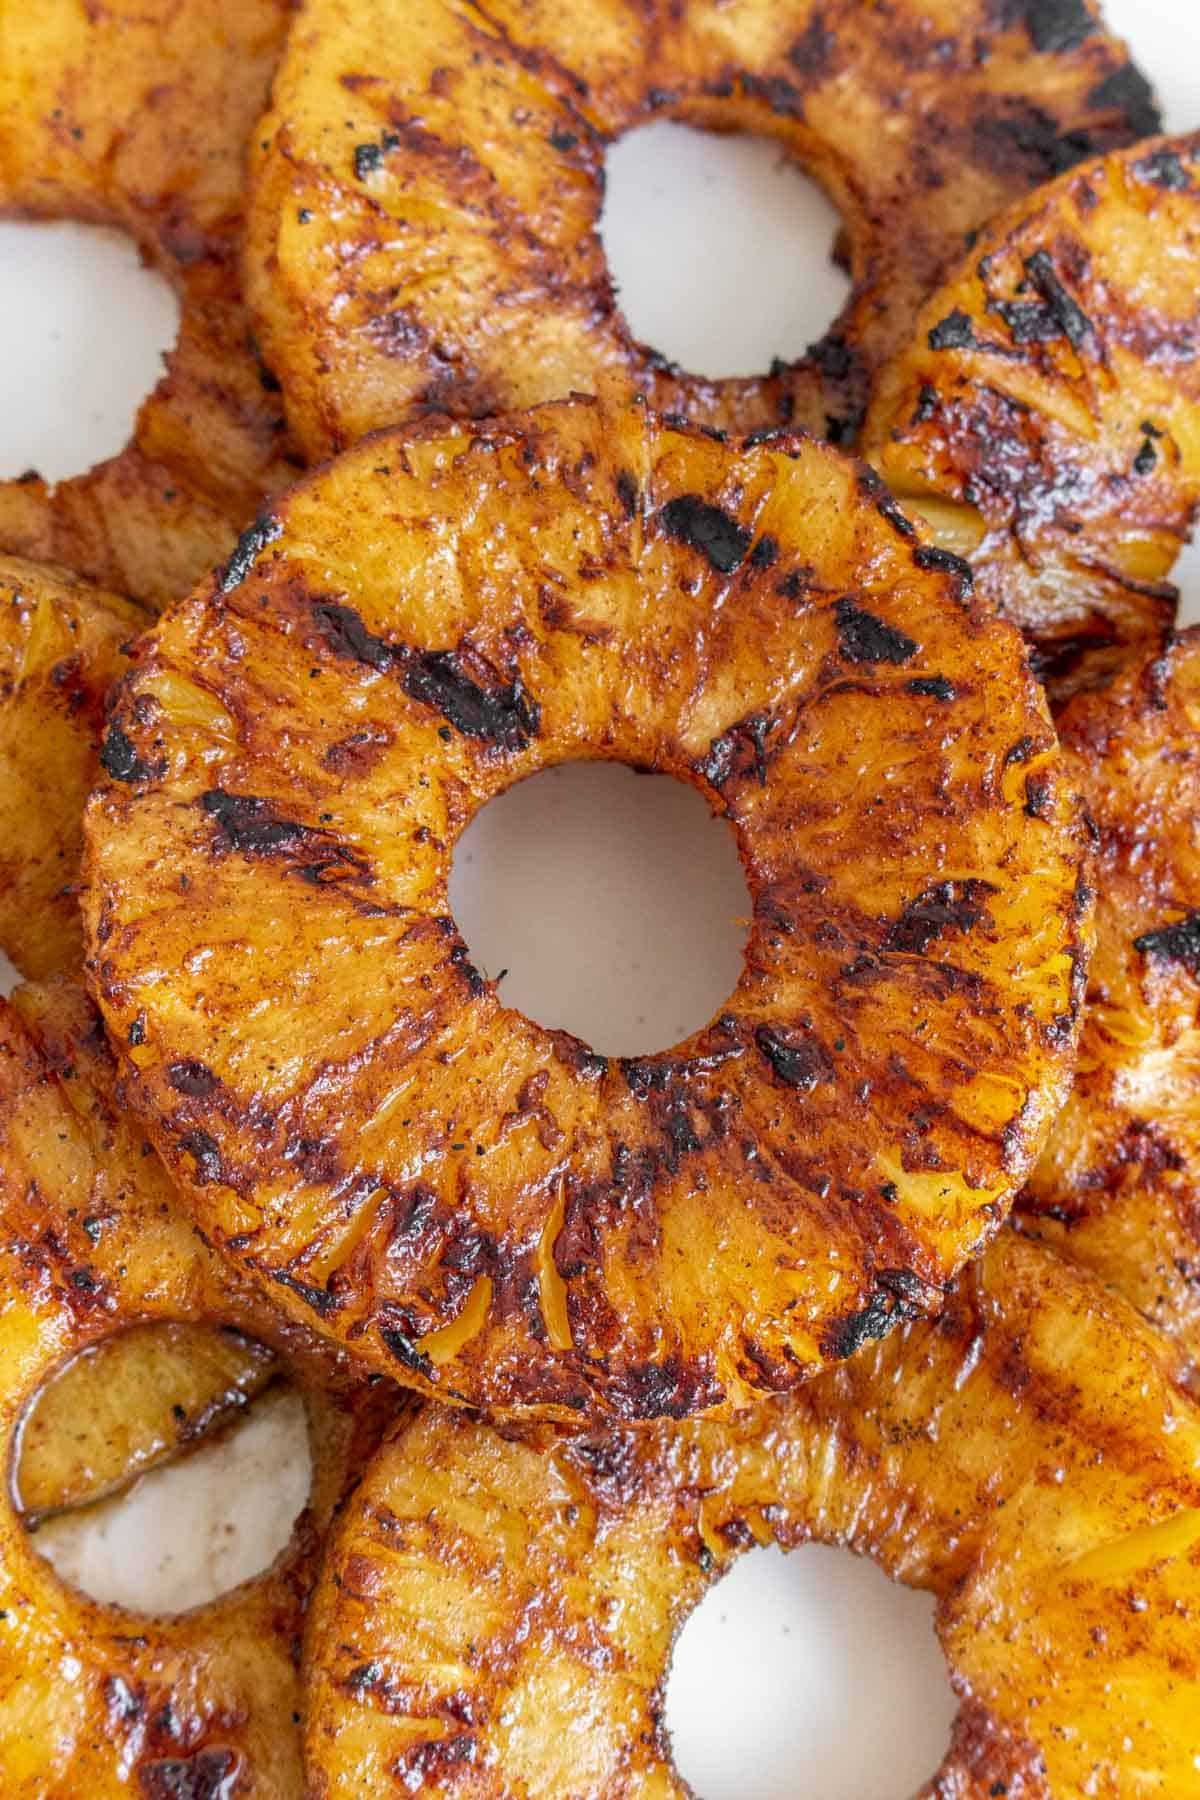 Overhead view of a grilled pineapple ring with grill marks.